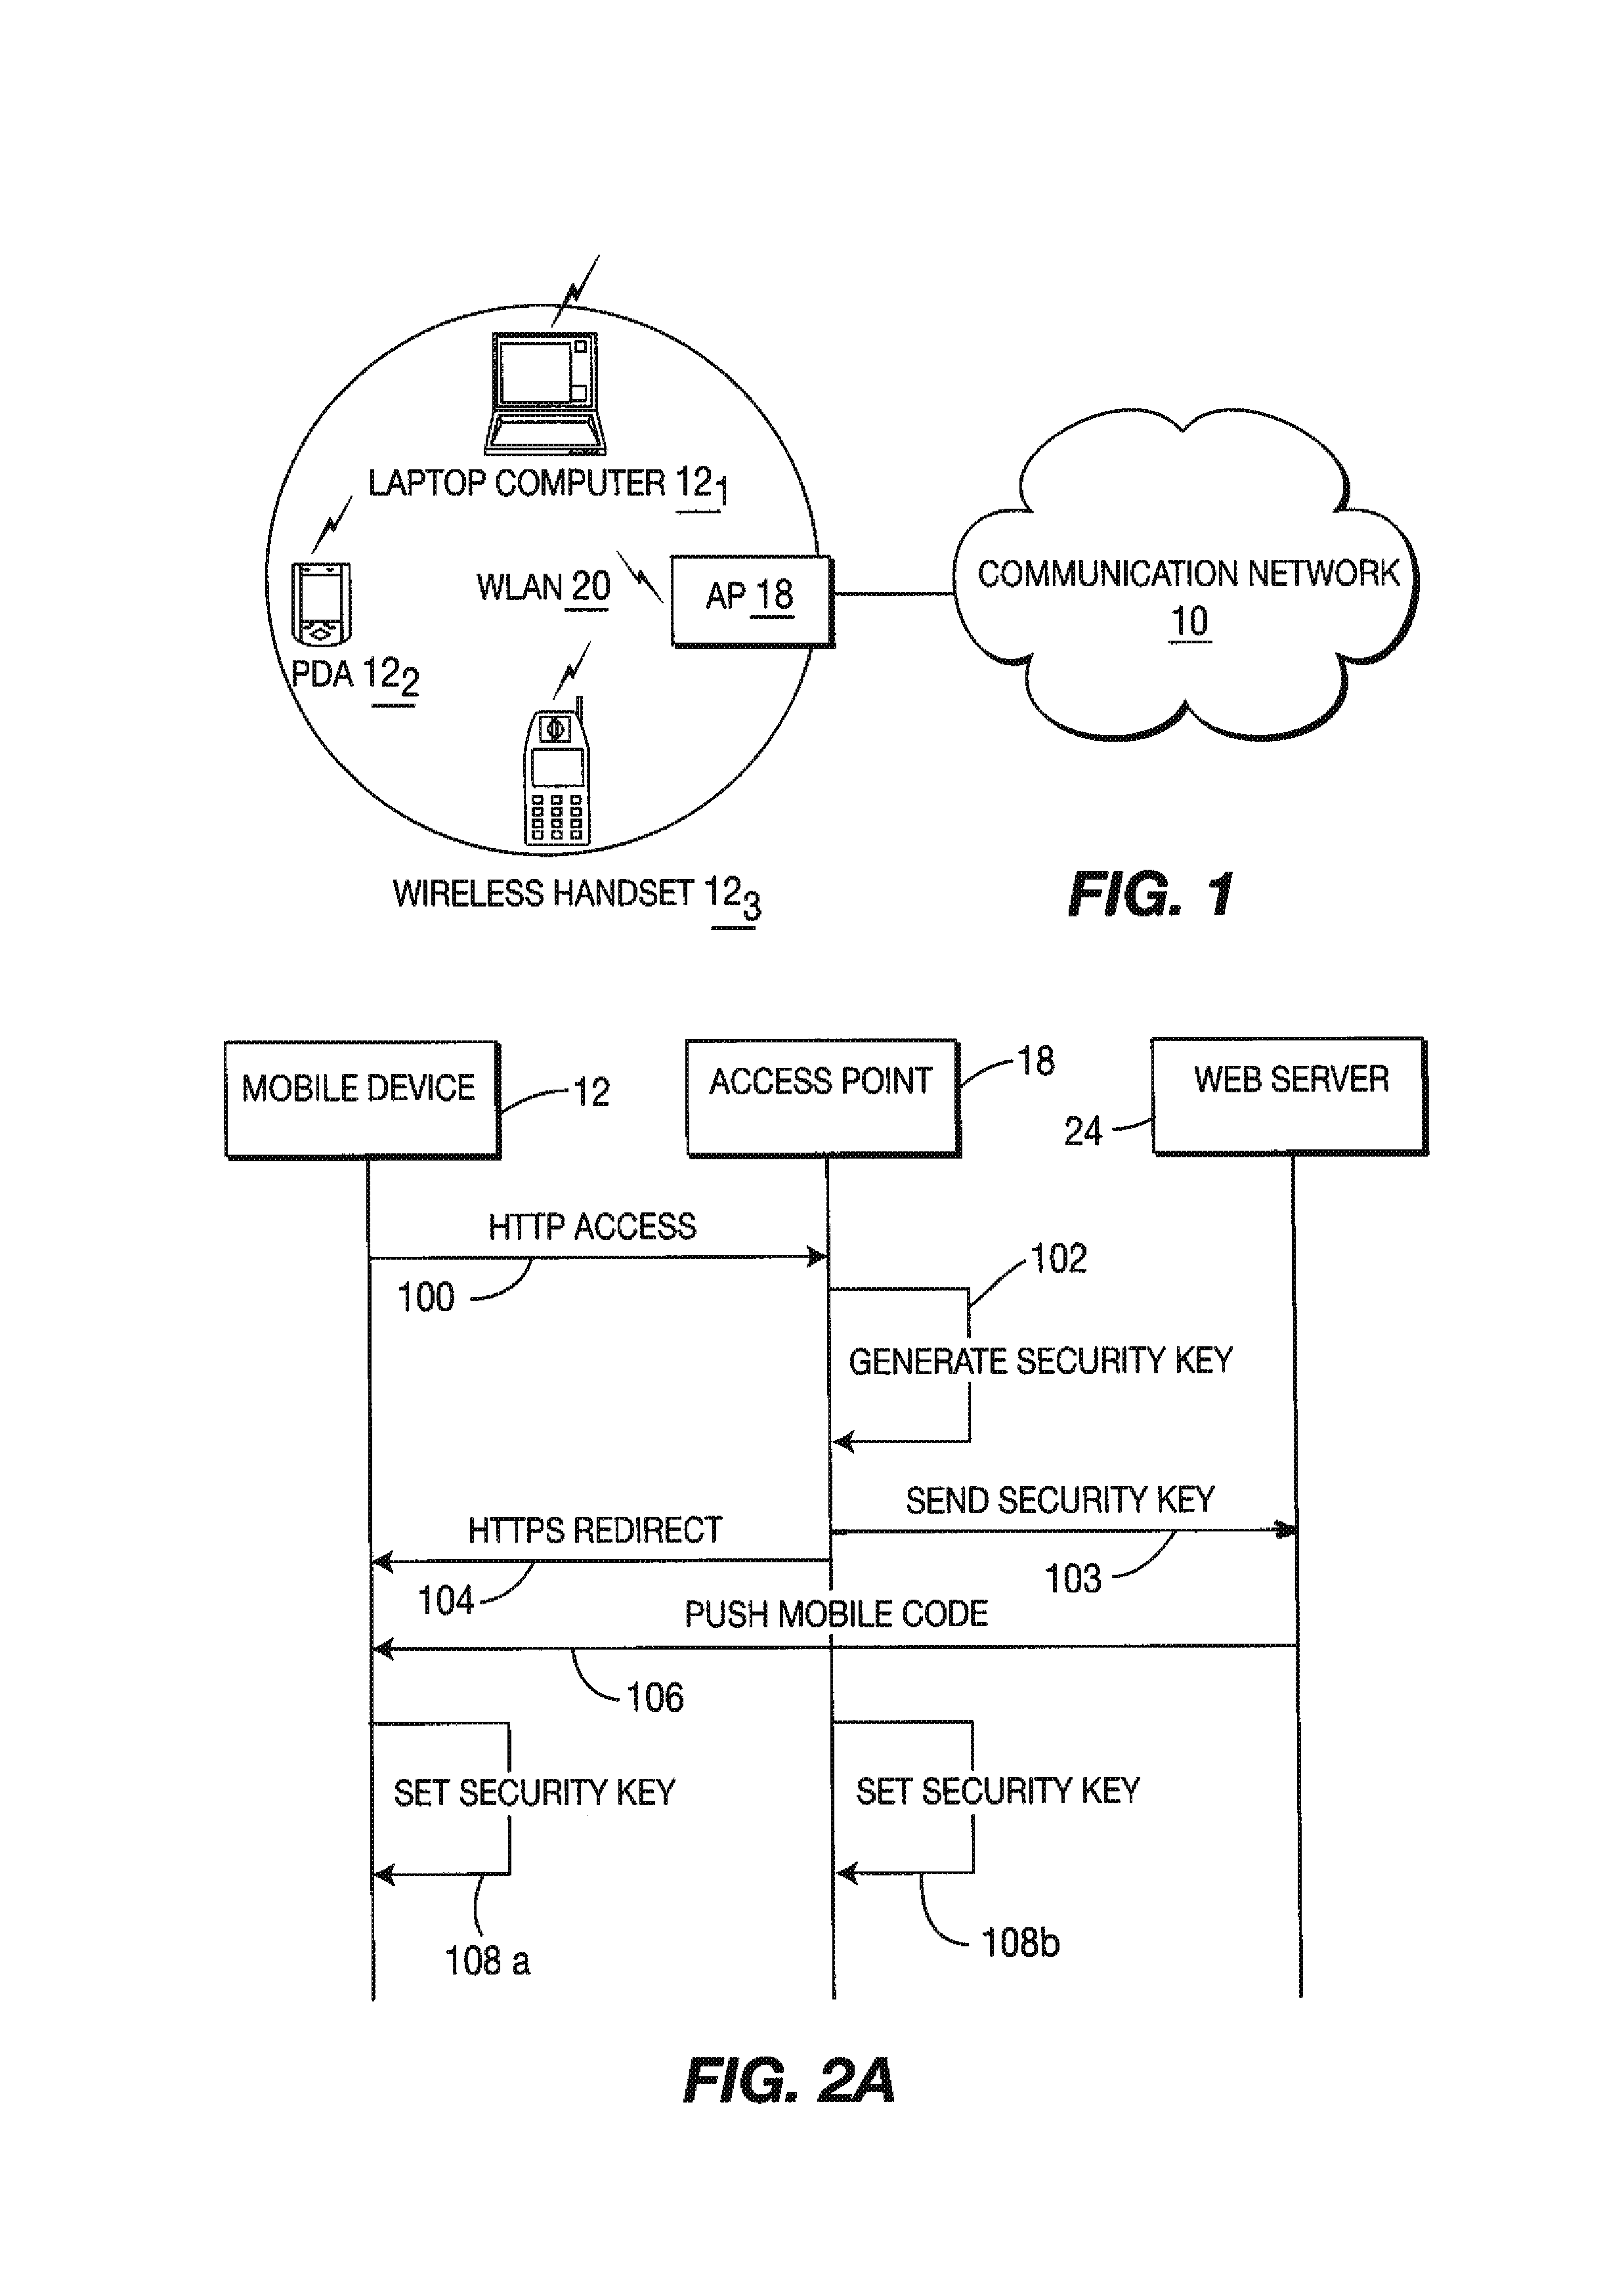 Method and apparatuses for secure, anonymous wireless LAN (WLAN) access